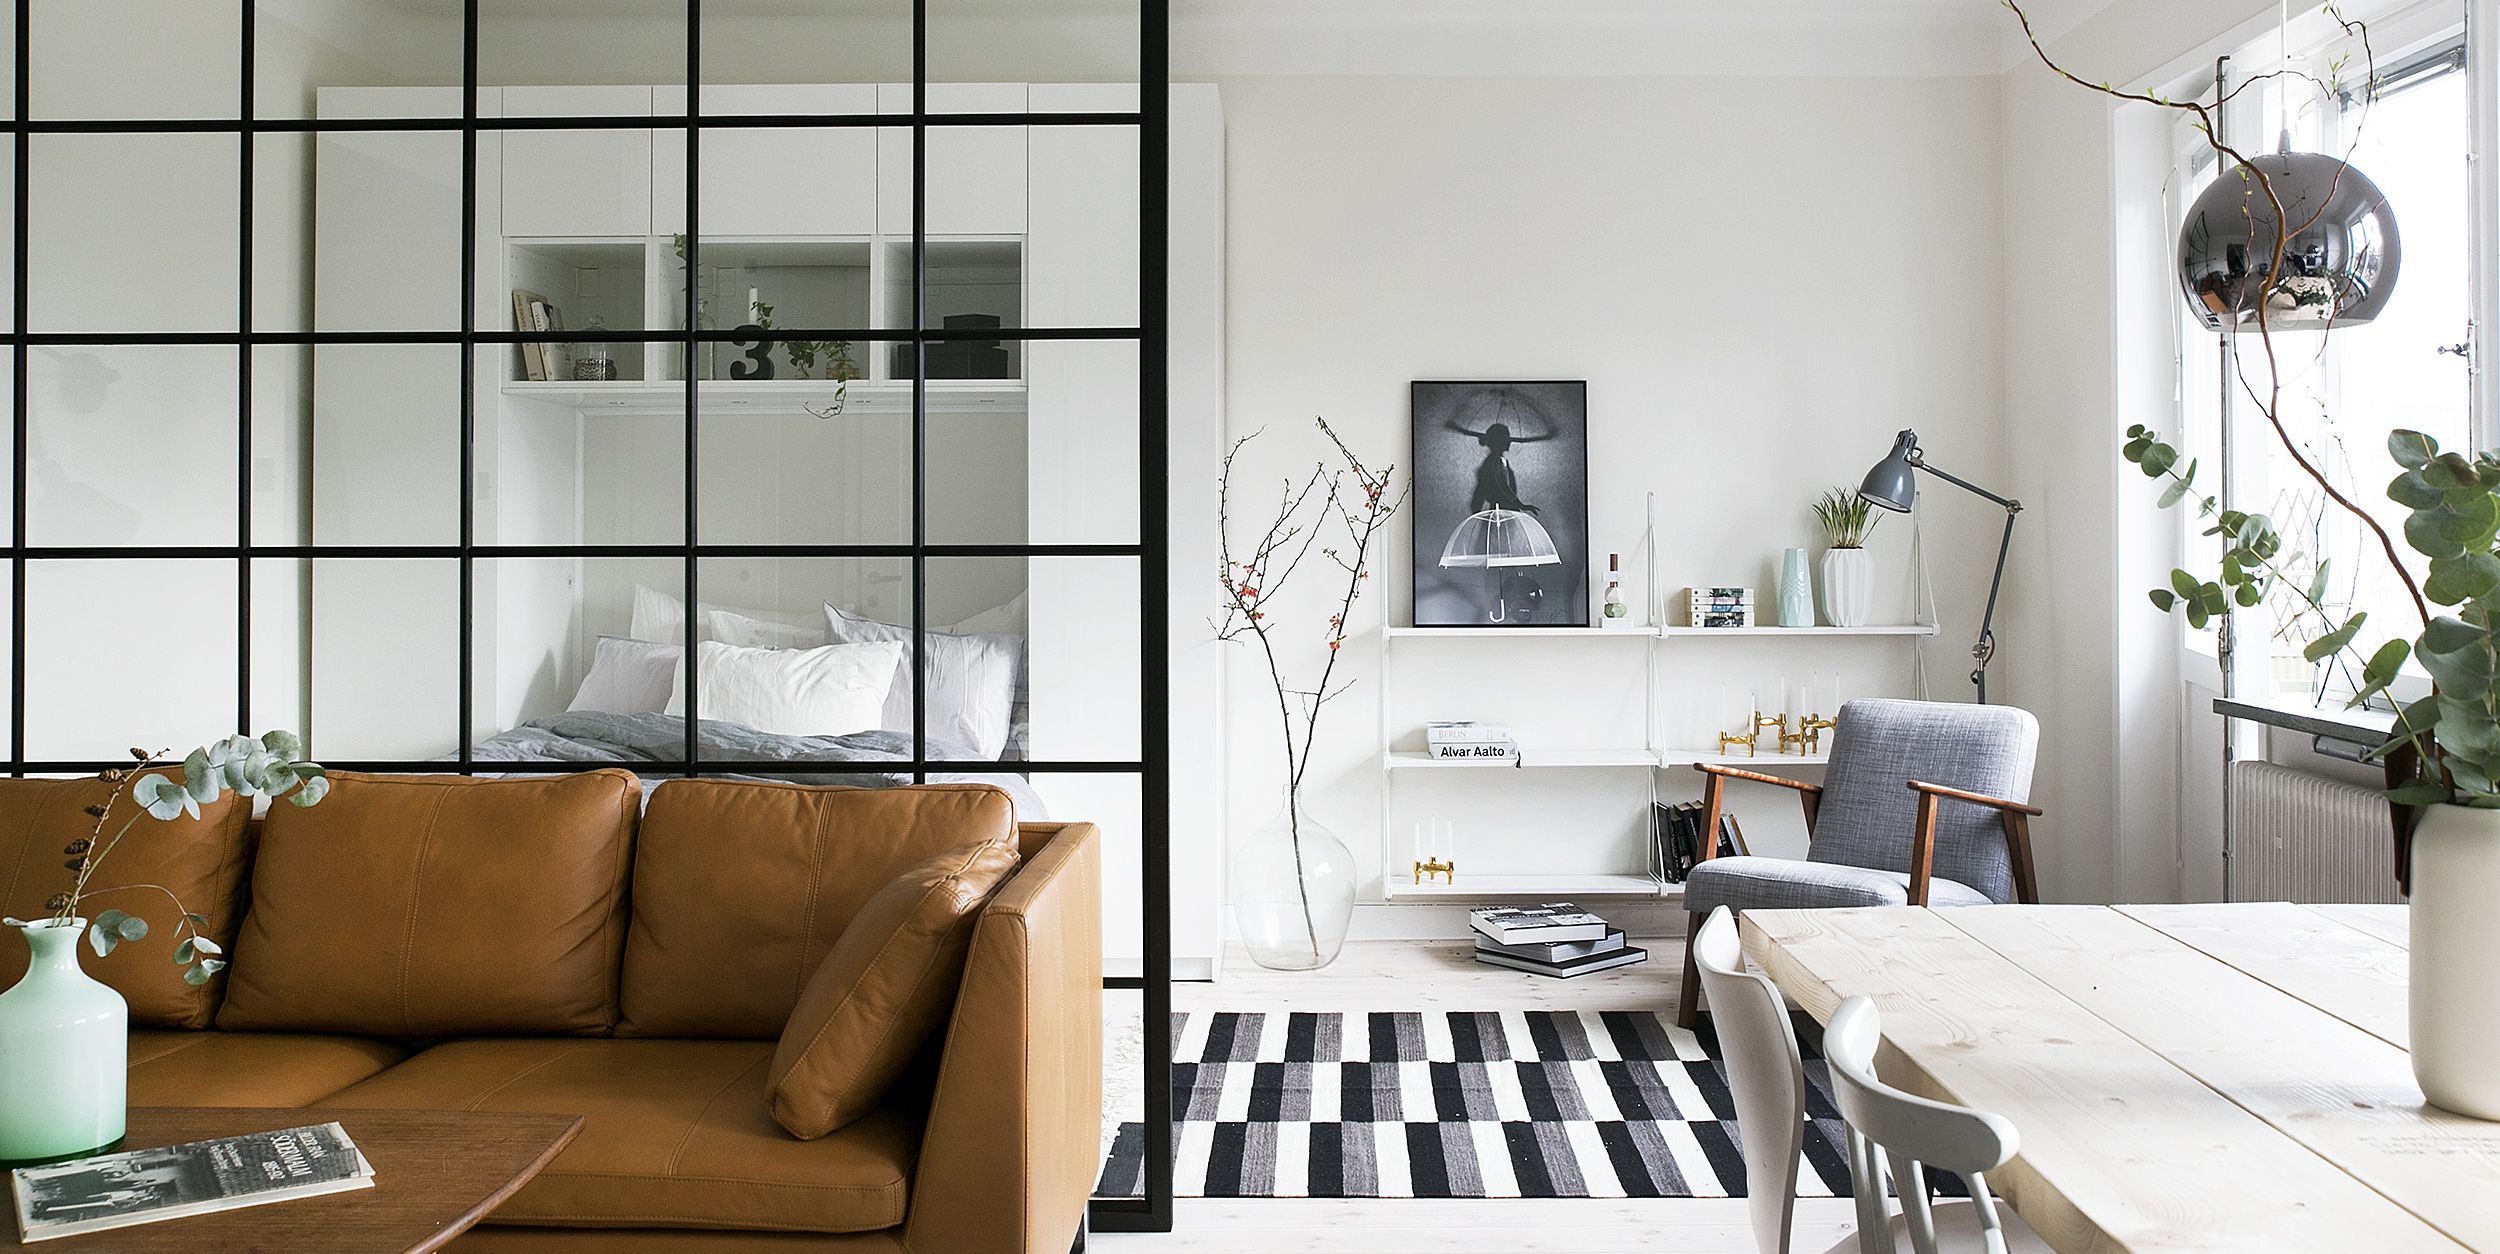 Apartment layout ideas – 10 of the best ways to arrange your space